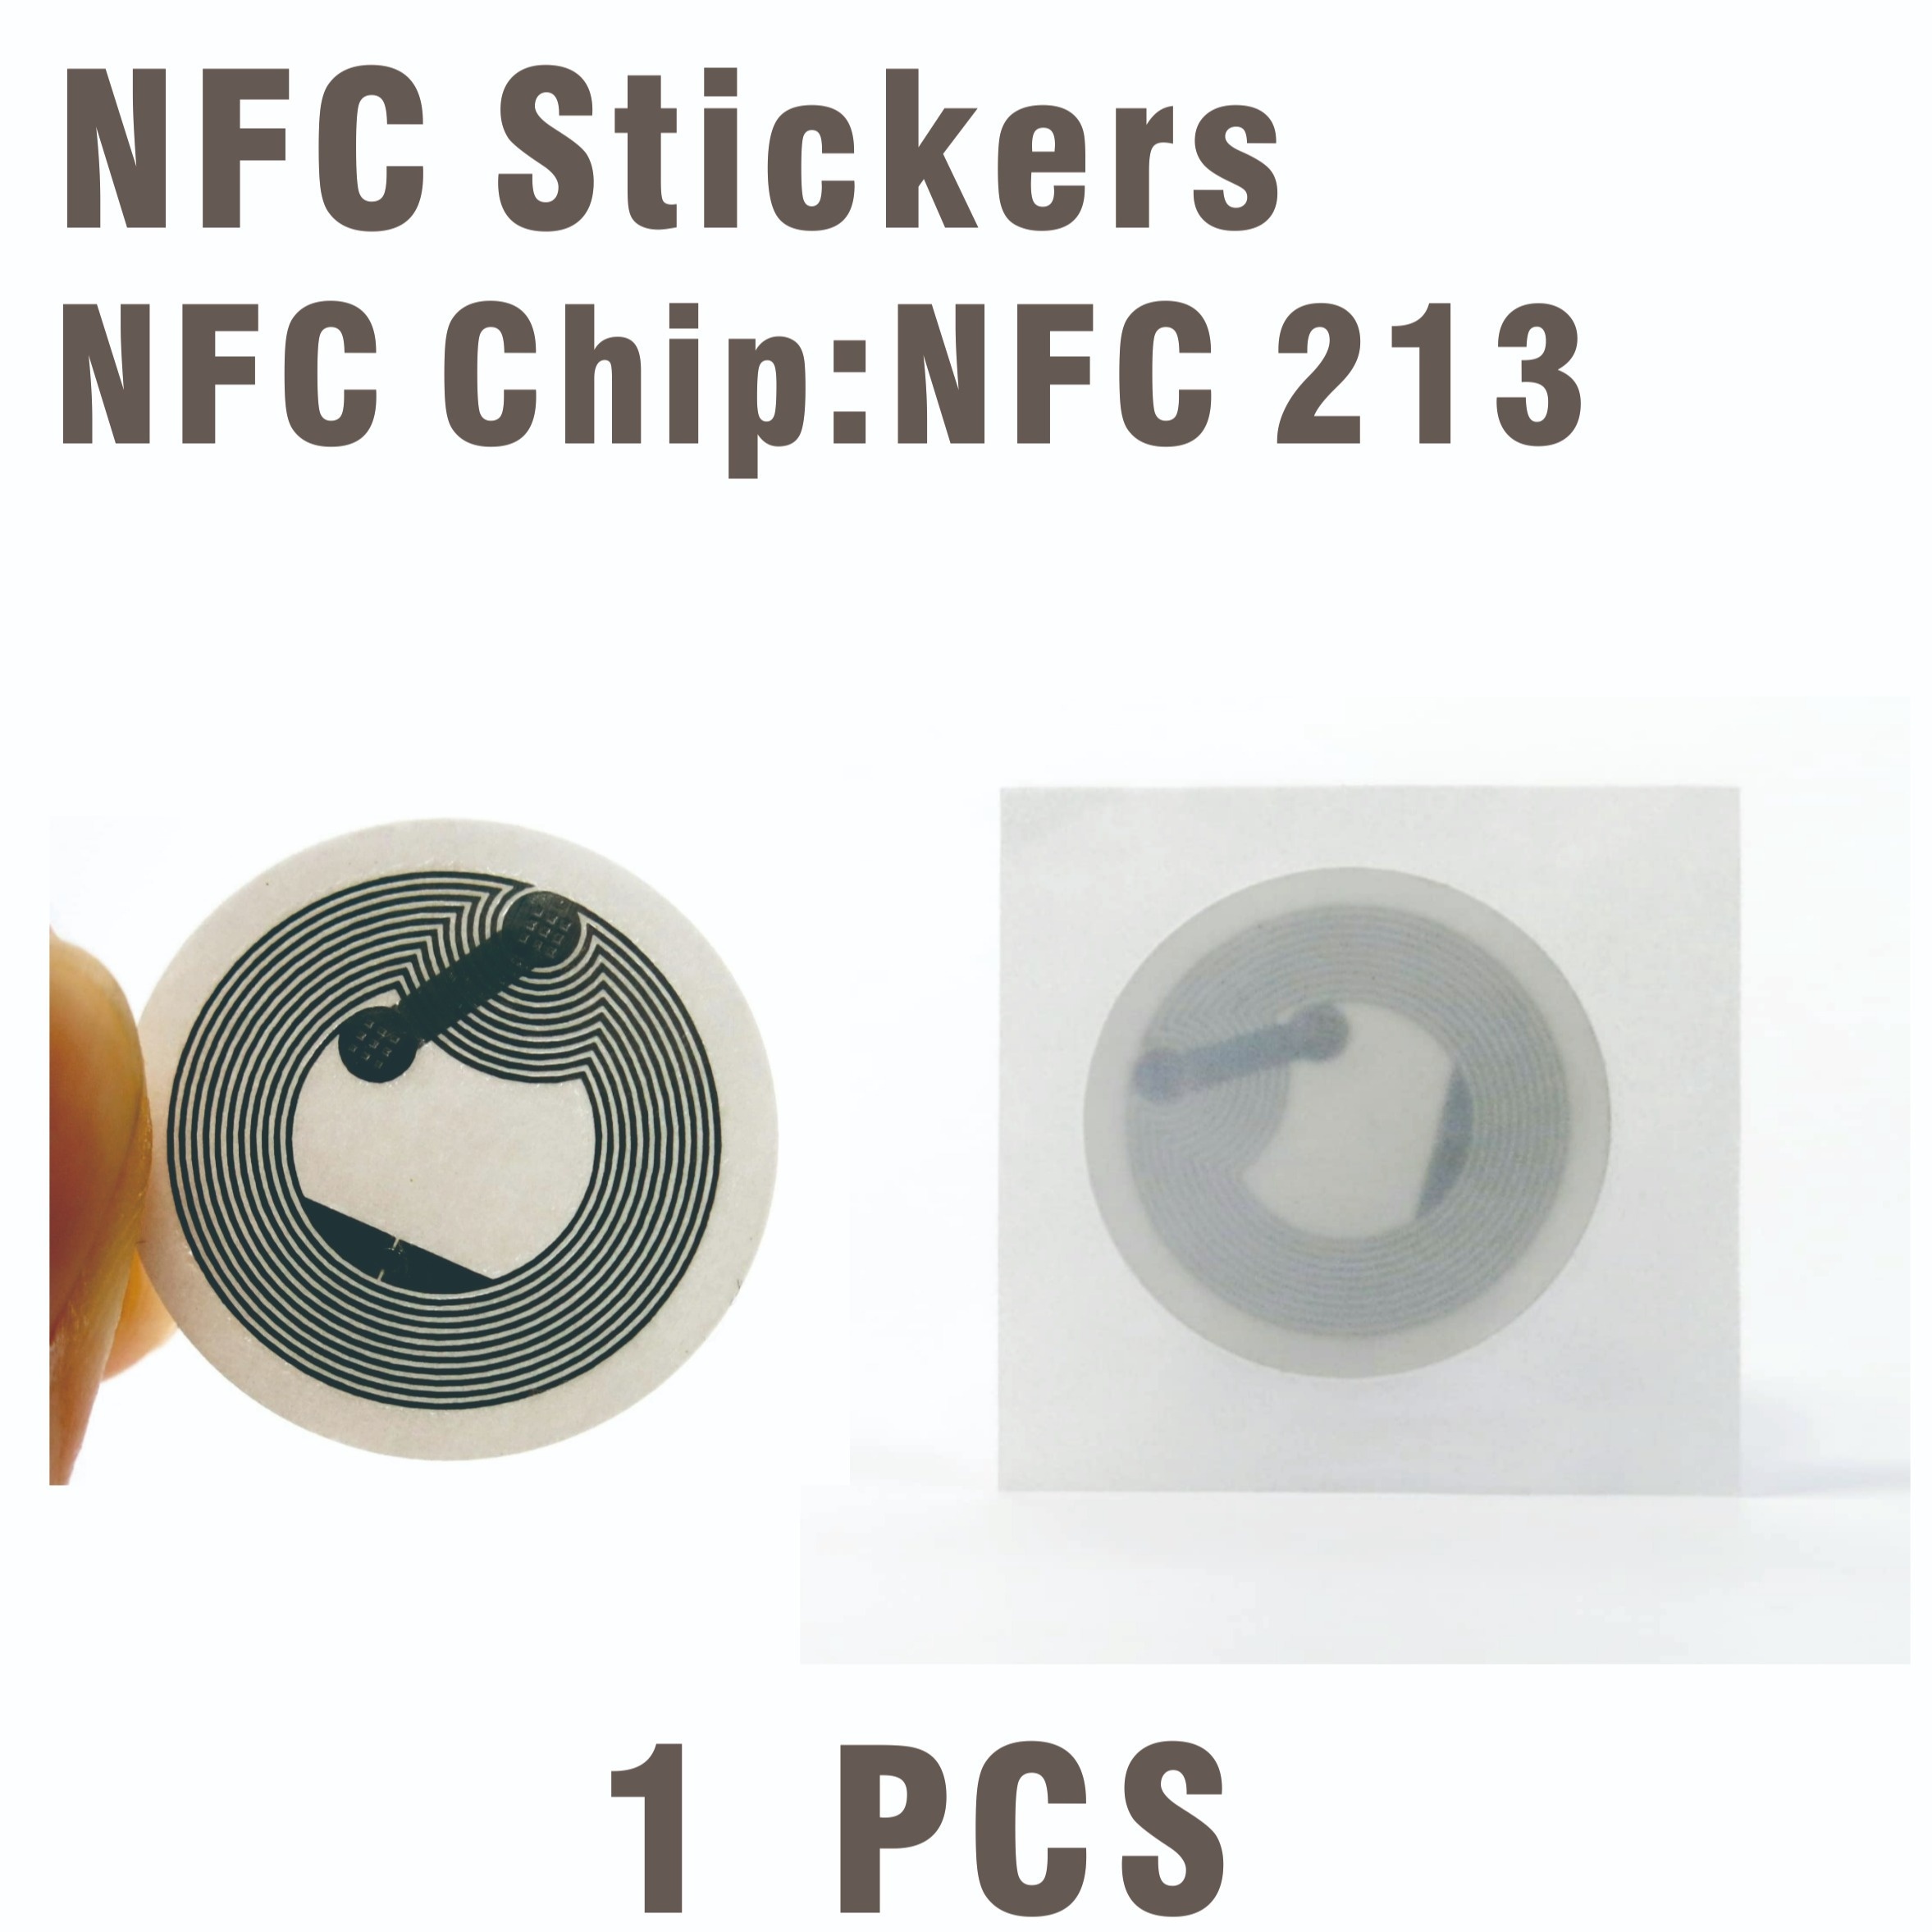 30pcs NFC Tags Ntag215 Labels, Black Color NFC Sticker Tags Diameter 25mm  (1) Round, 504 Bytes Memory 13.56MHz Compatible with NFC Chips, Tagmo, and